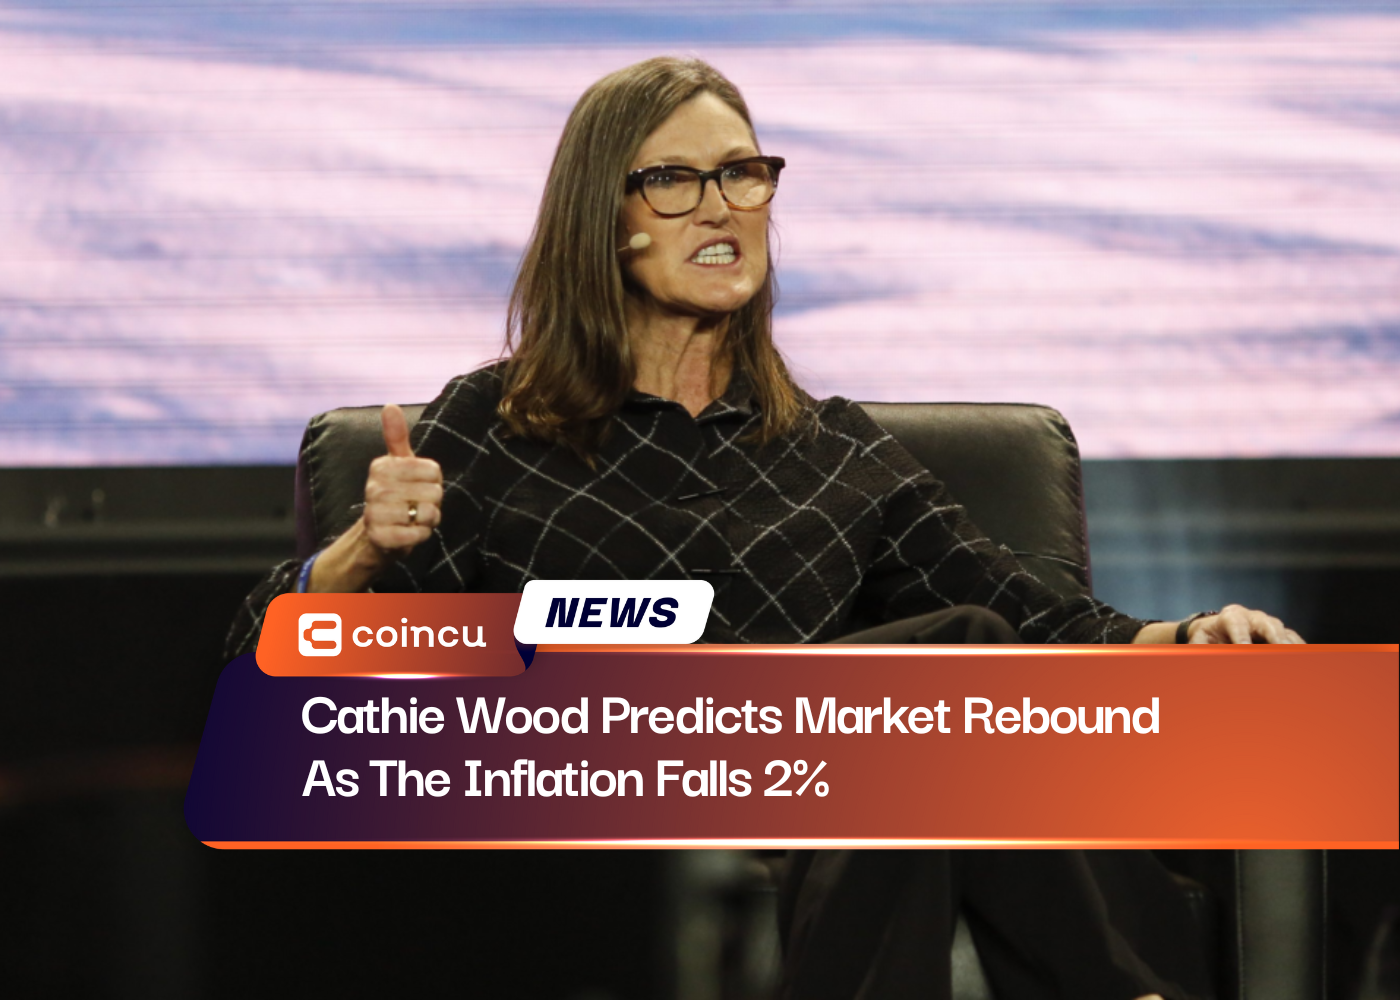 Cathie Wood Predicts Market Rebound As The Inflation Falls 2%